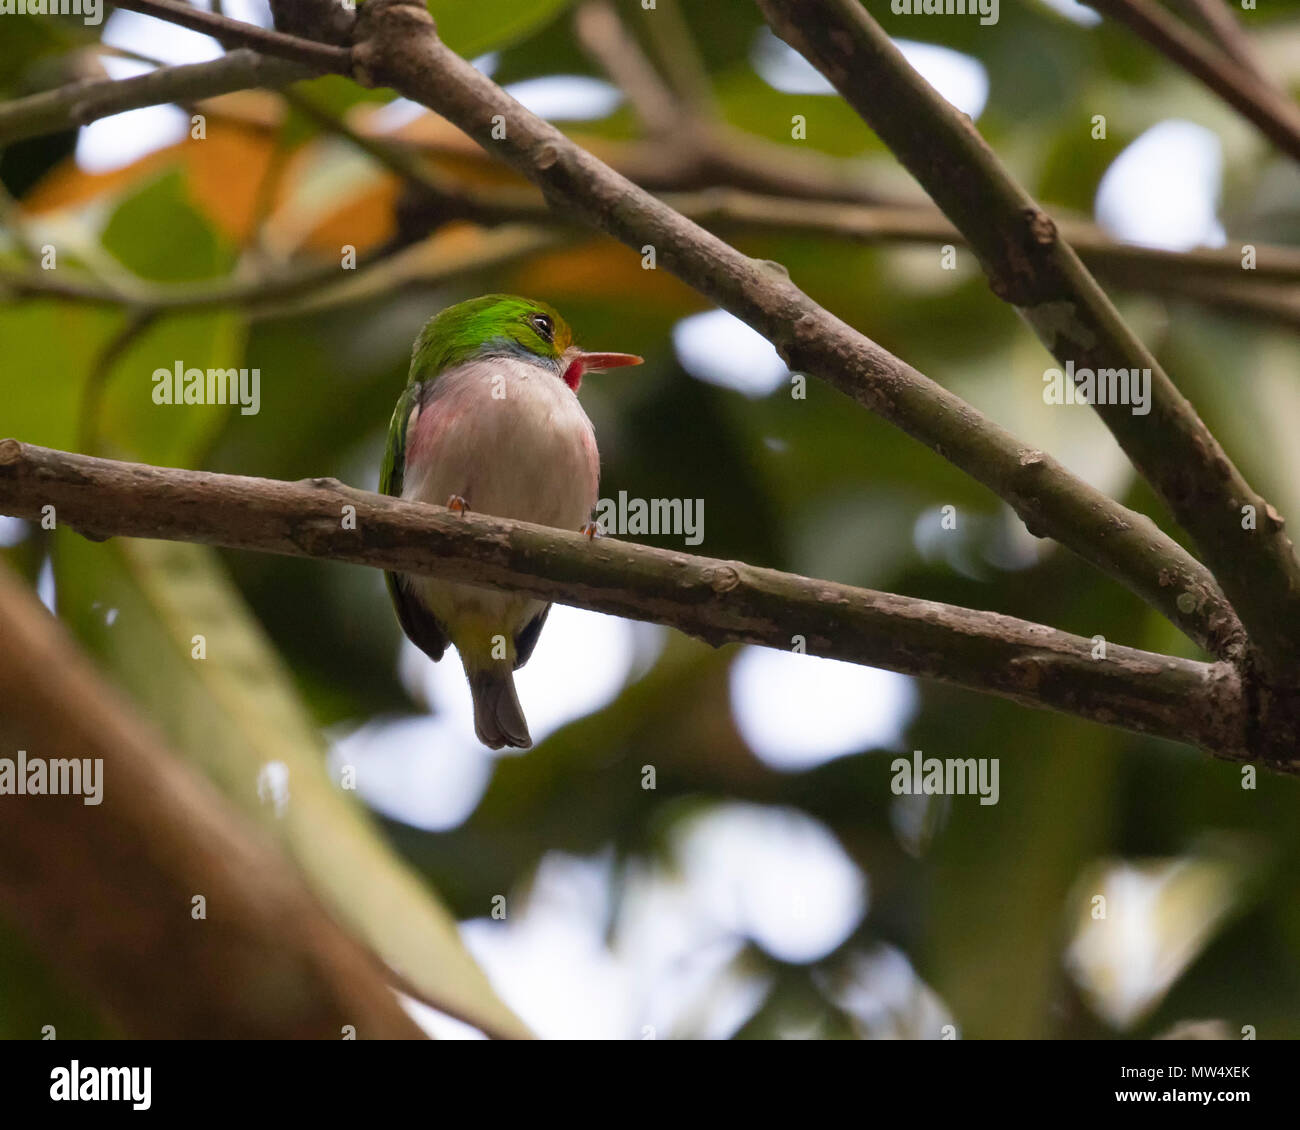 Cuban Tody, a tiny bird, perched on a branch Stock Photo